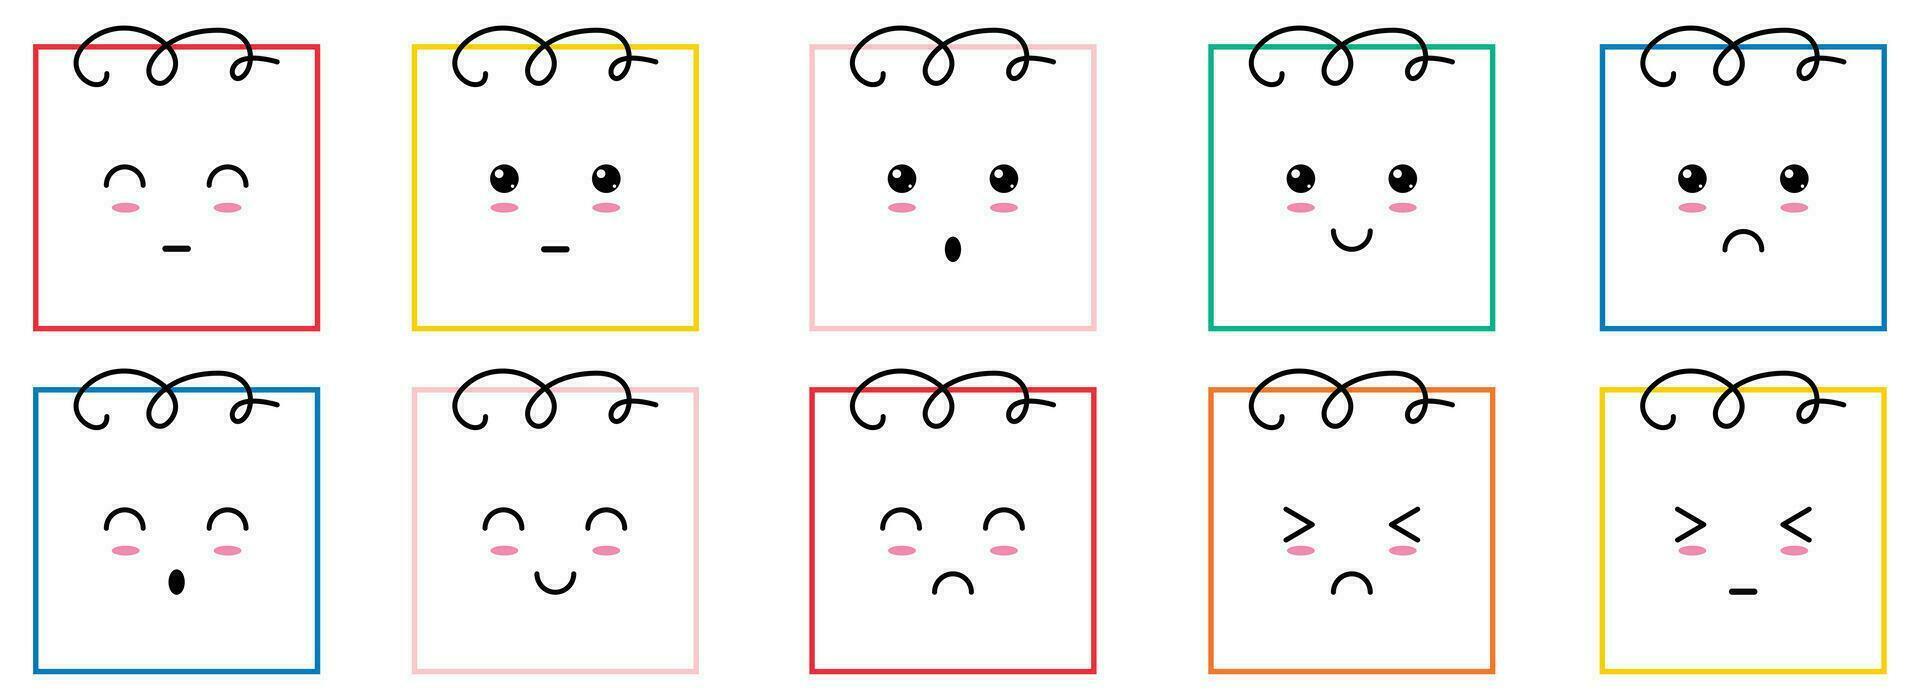 Emoticons with various emotions. Emoji in cartoon style. Vector illustration isolated on white